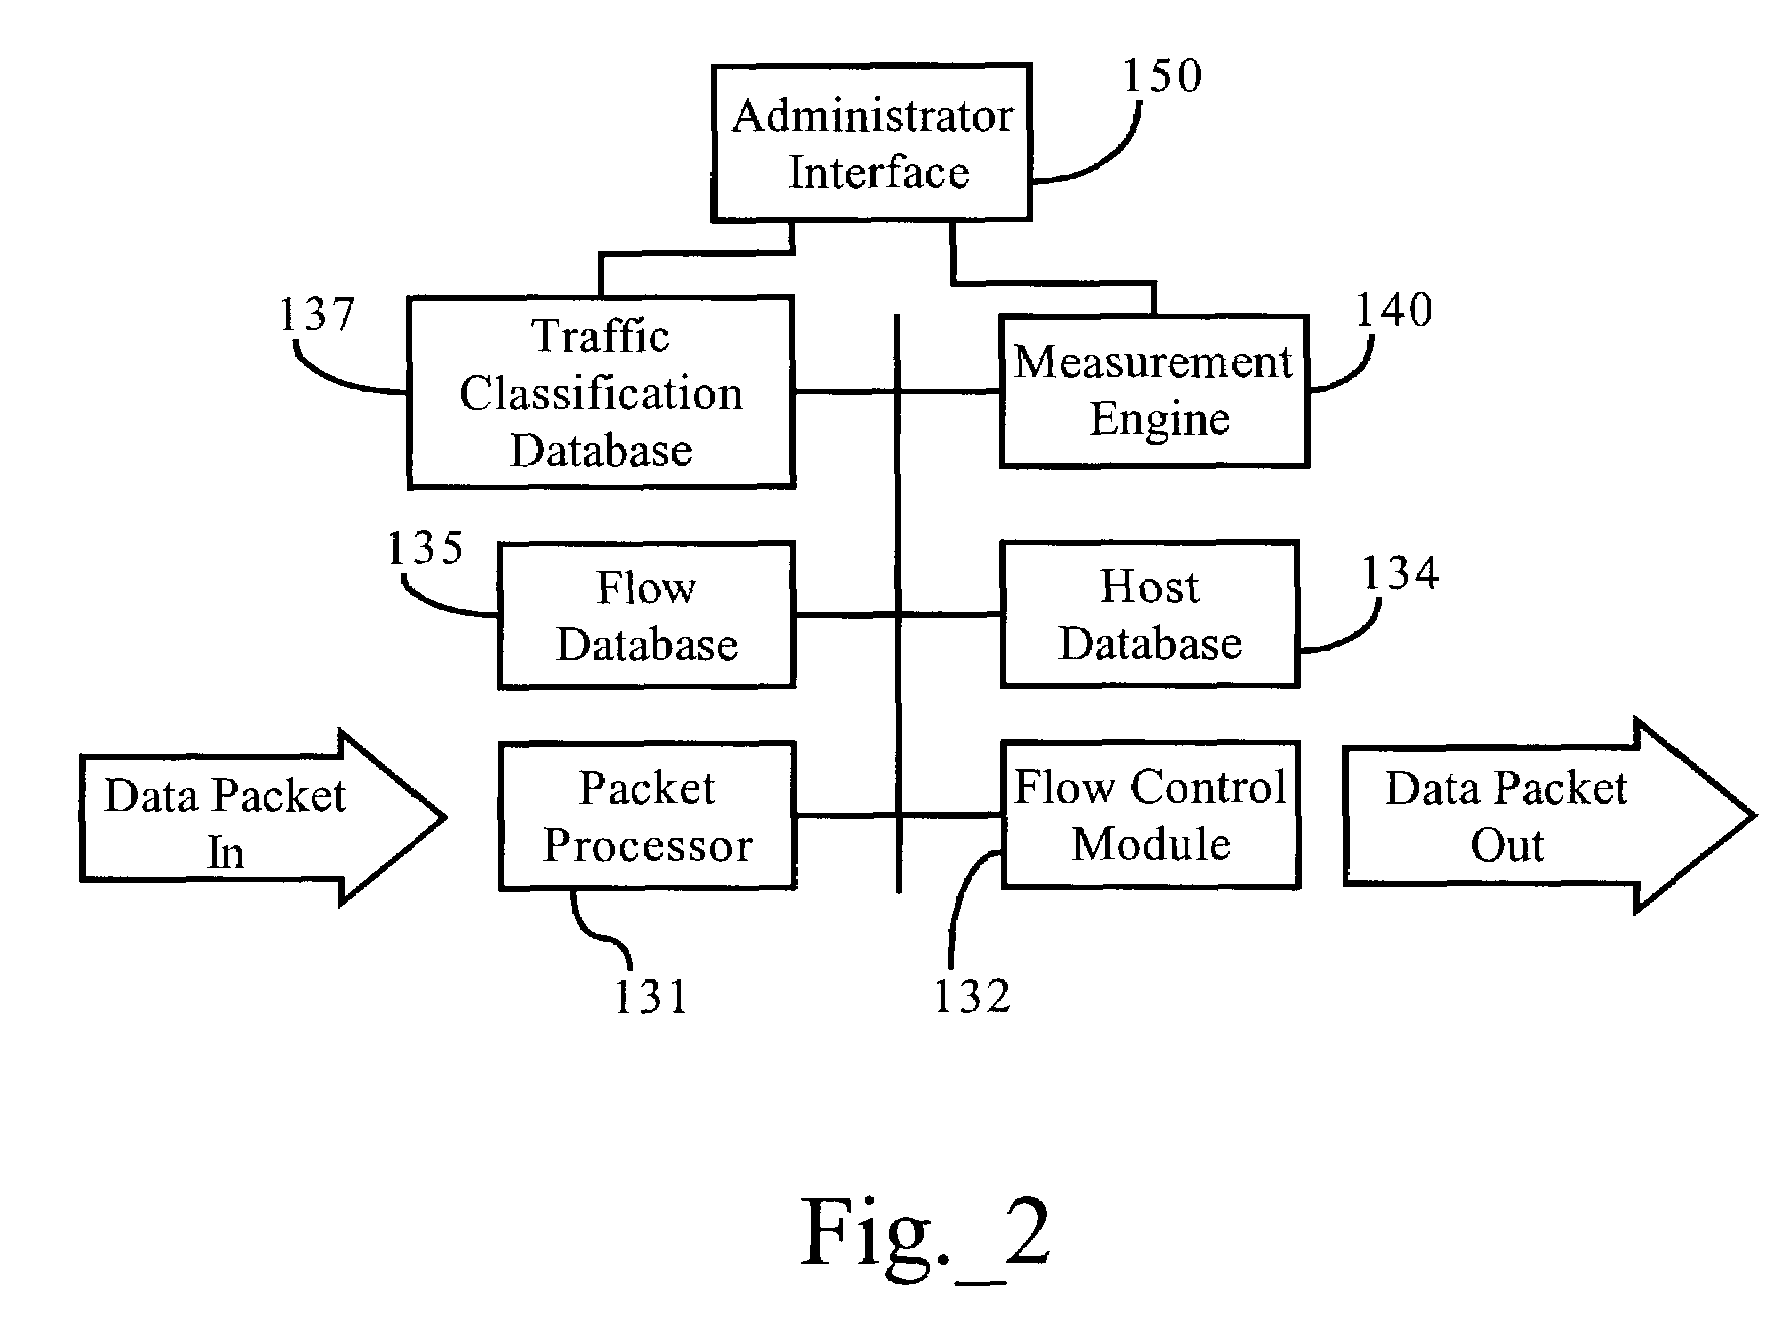 Classification data structure enabling multi-dimensional network traffic classification and control schemes